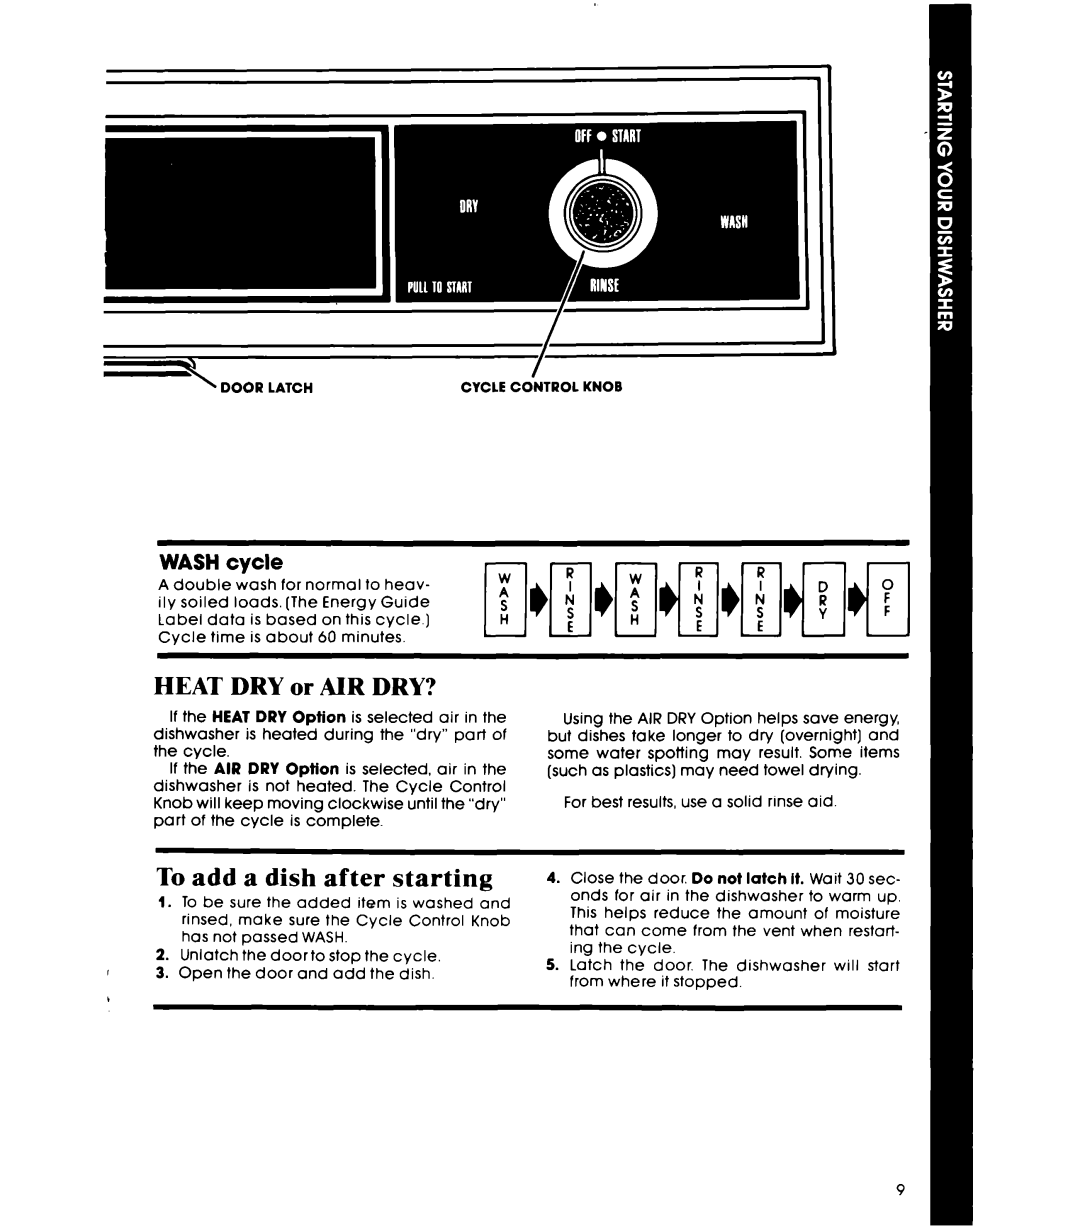 Whirlpool DP1098XR Series manual HEAT DRY or AIR DRY?, To add a dish after starting, WASH cycle 